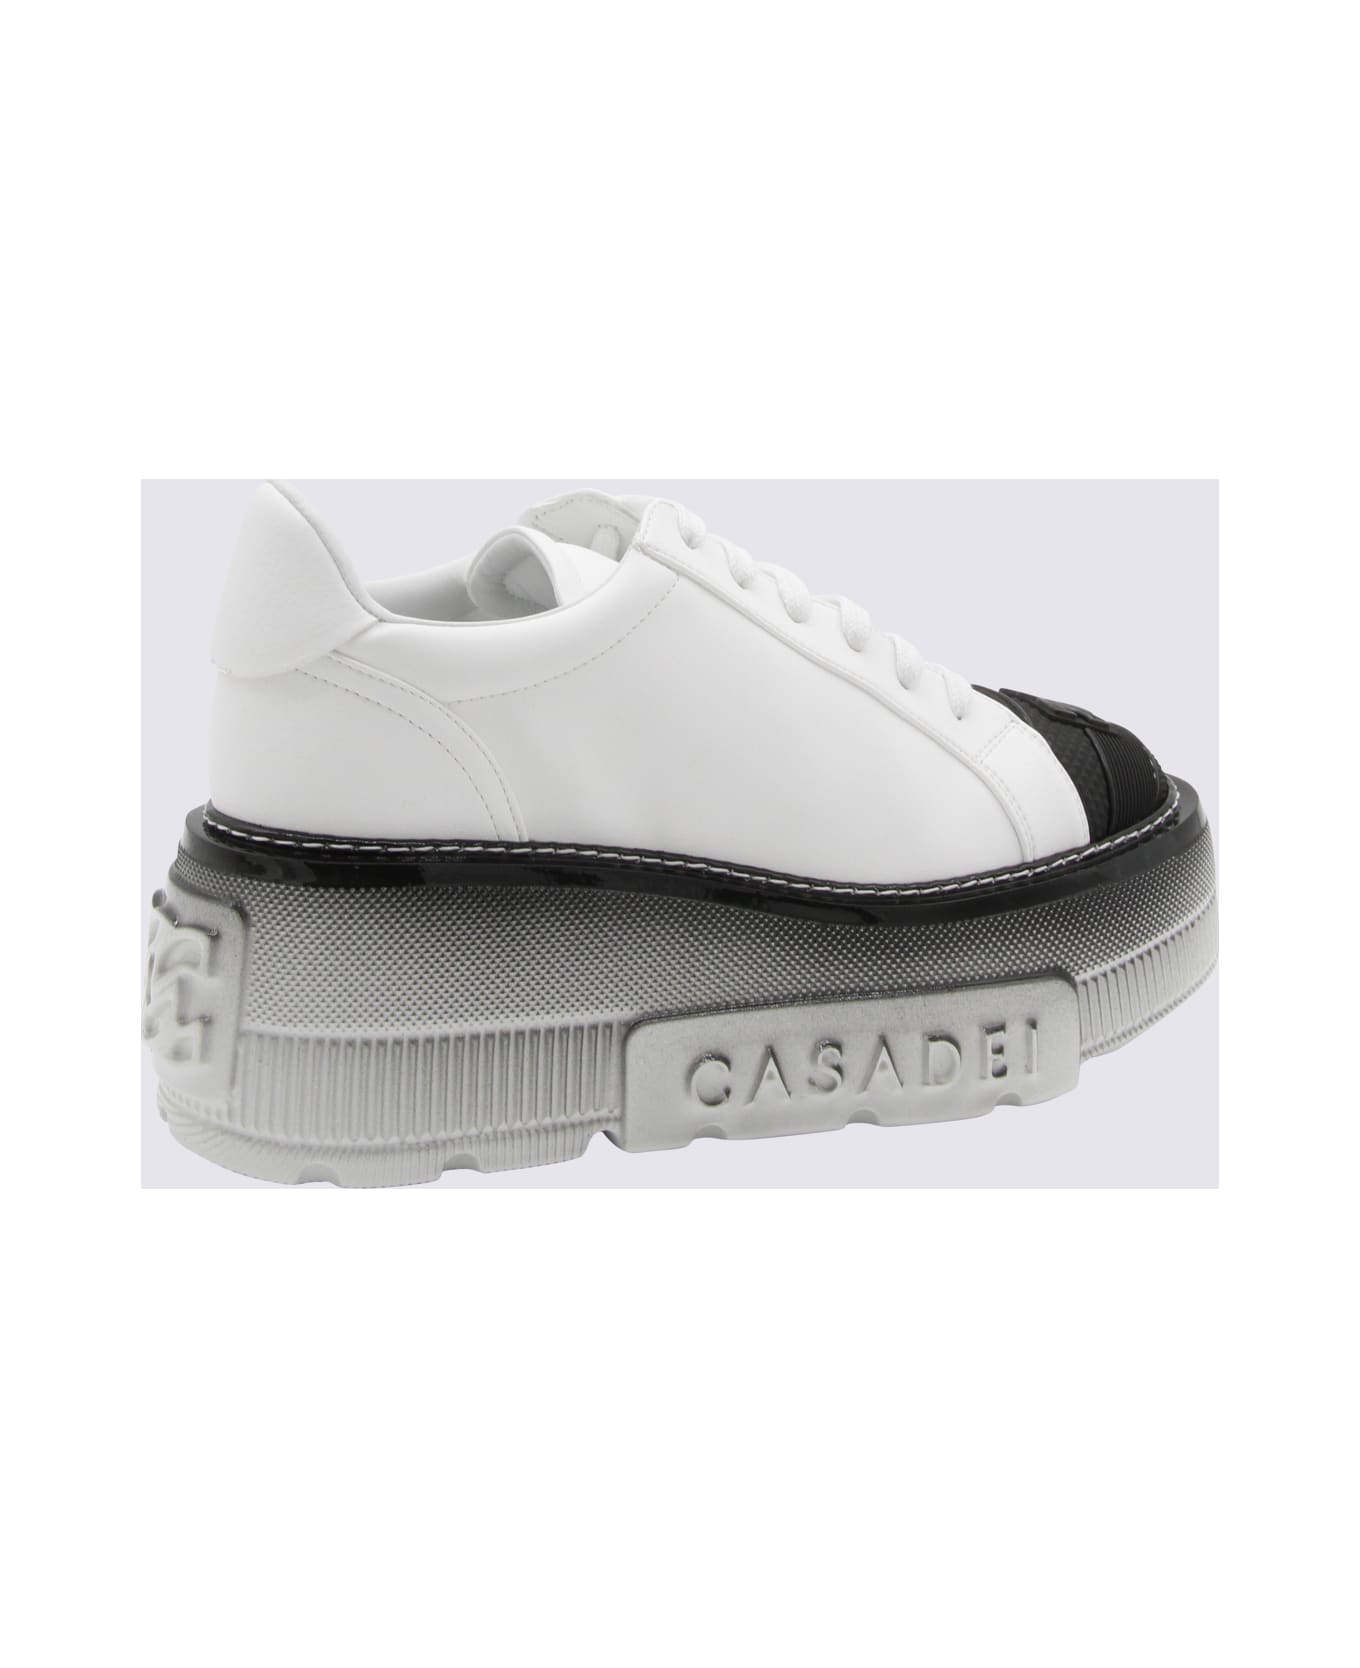 Casadei White And Black Leather Sneakers - White ウェッジシューズ